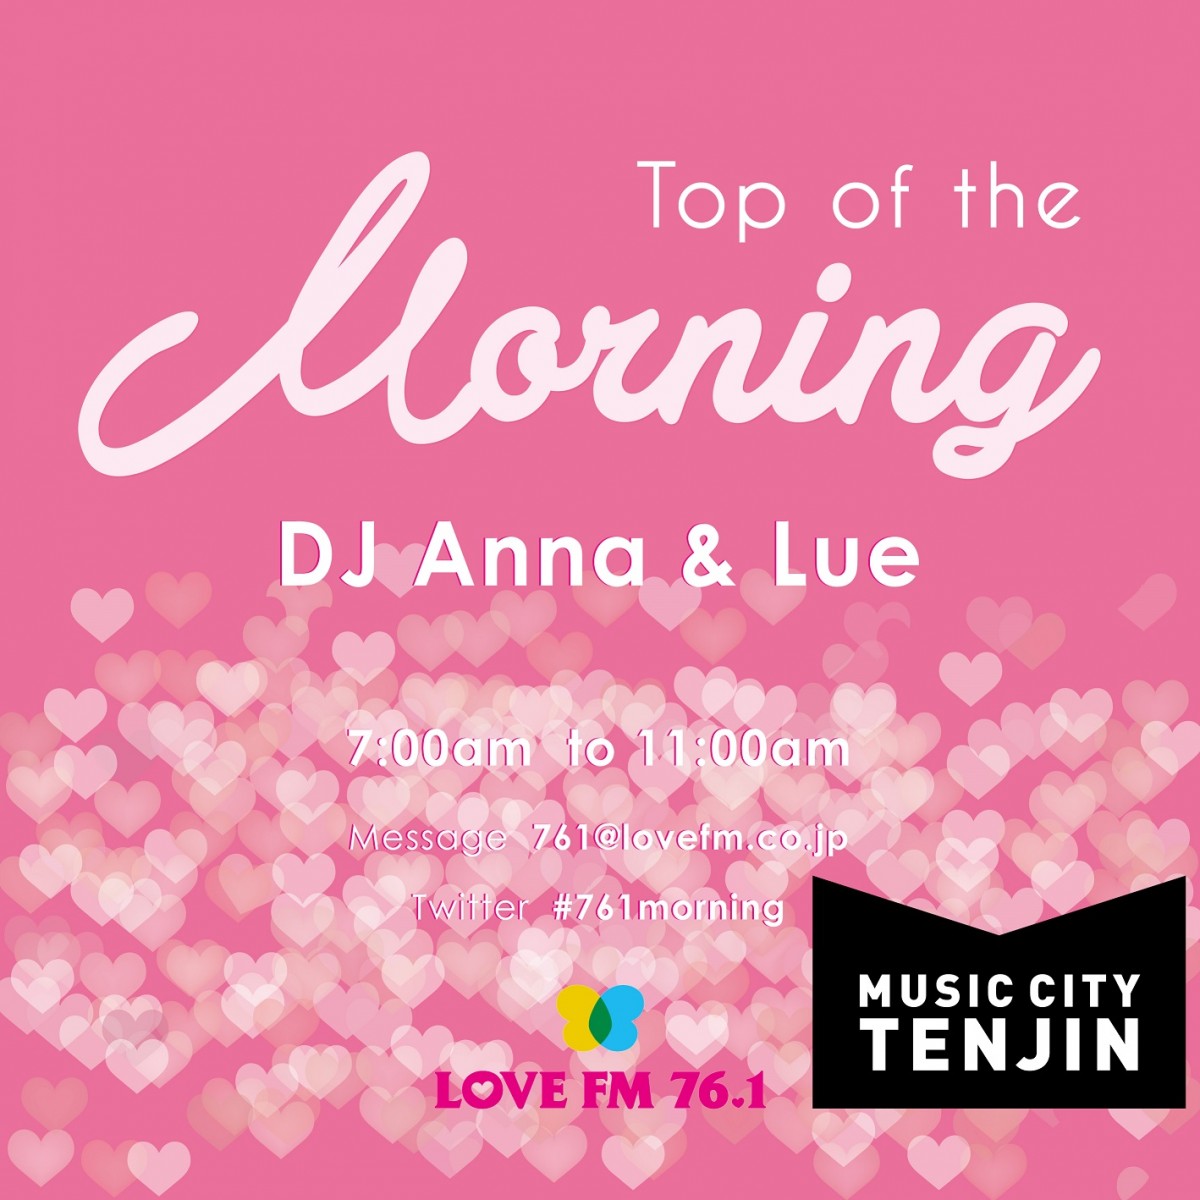 Top of the Morning -MUSIC CITY TENJIN Special Edition-